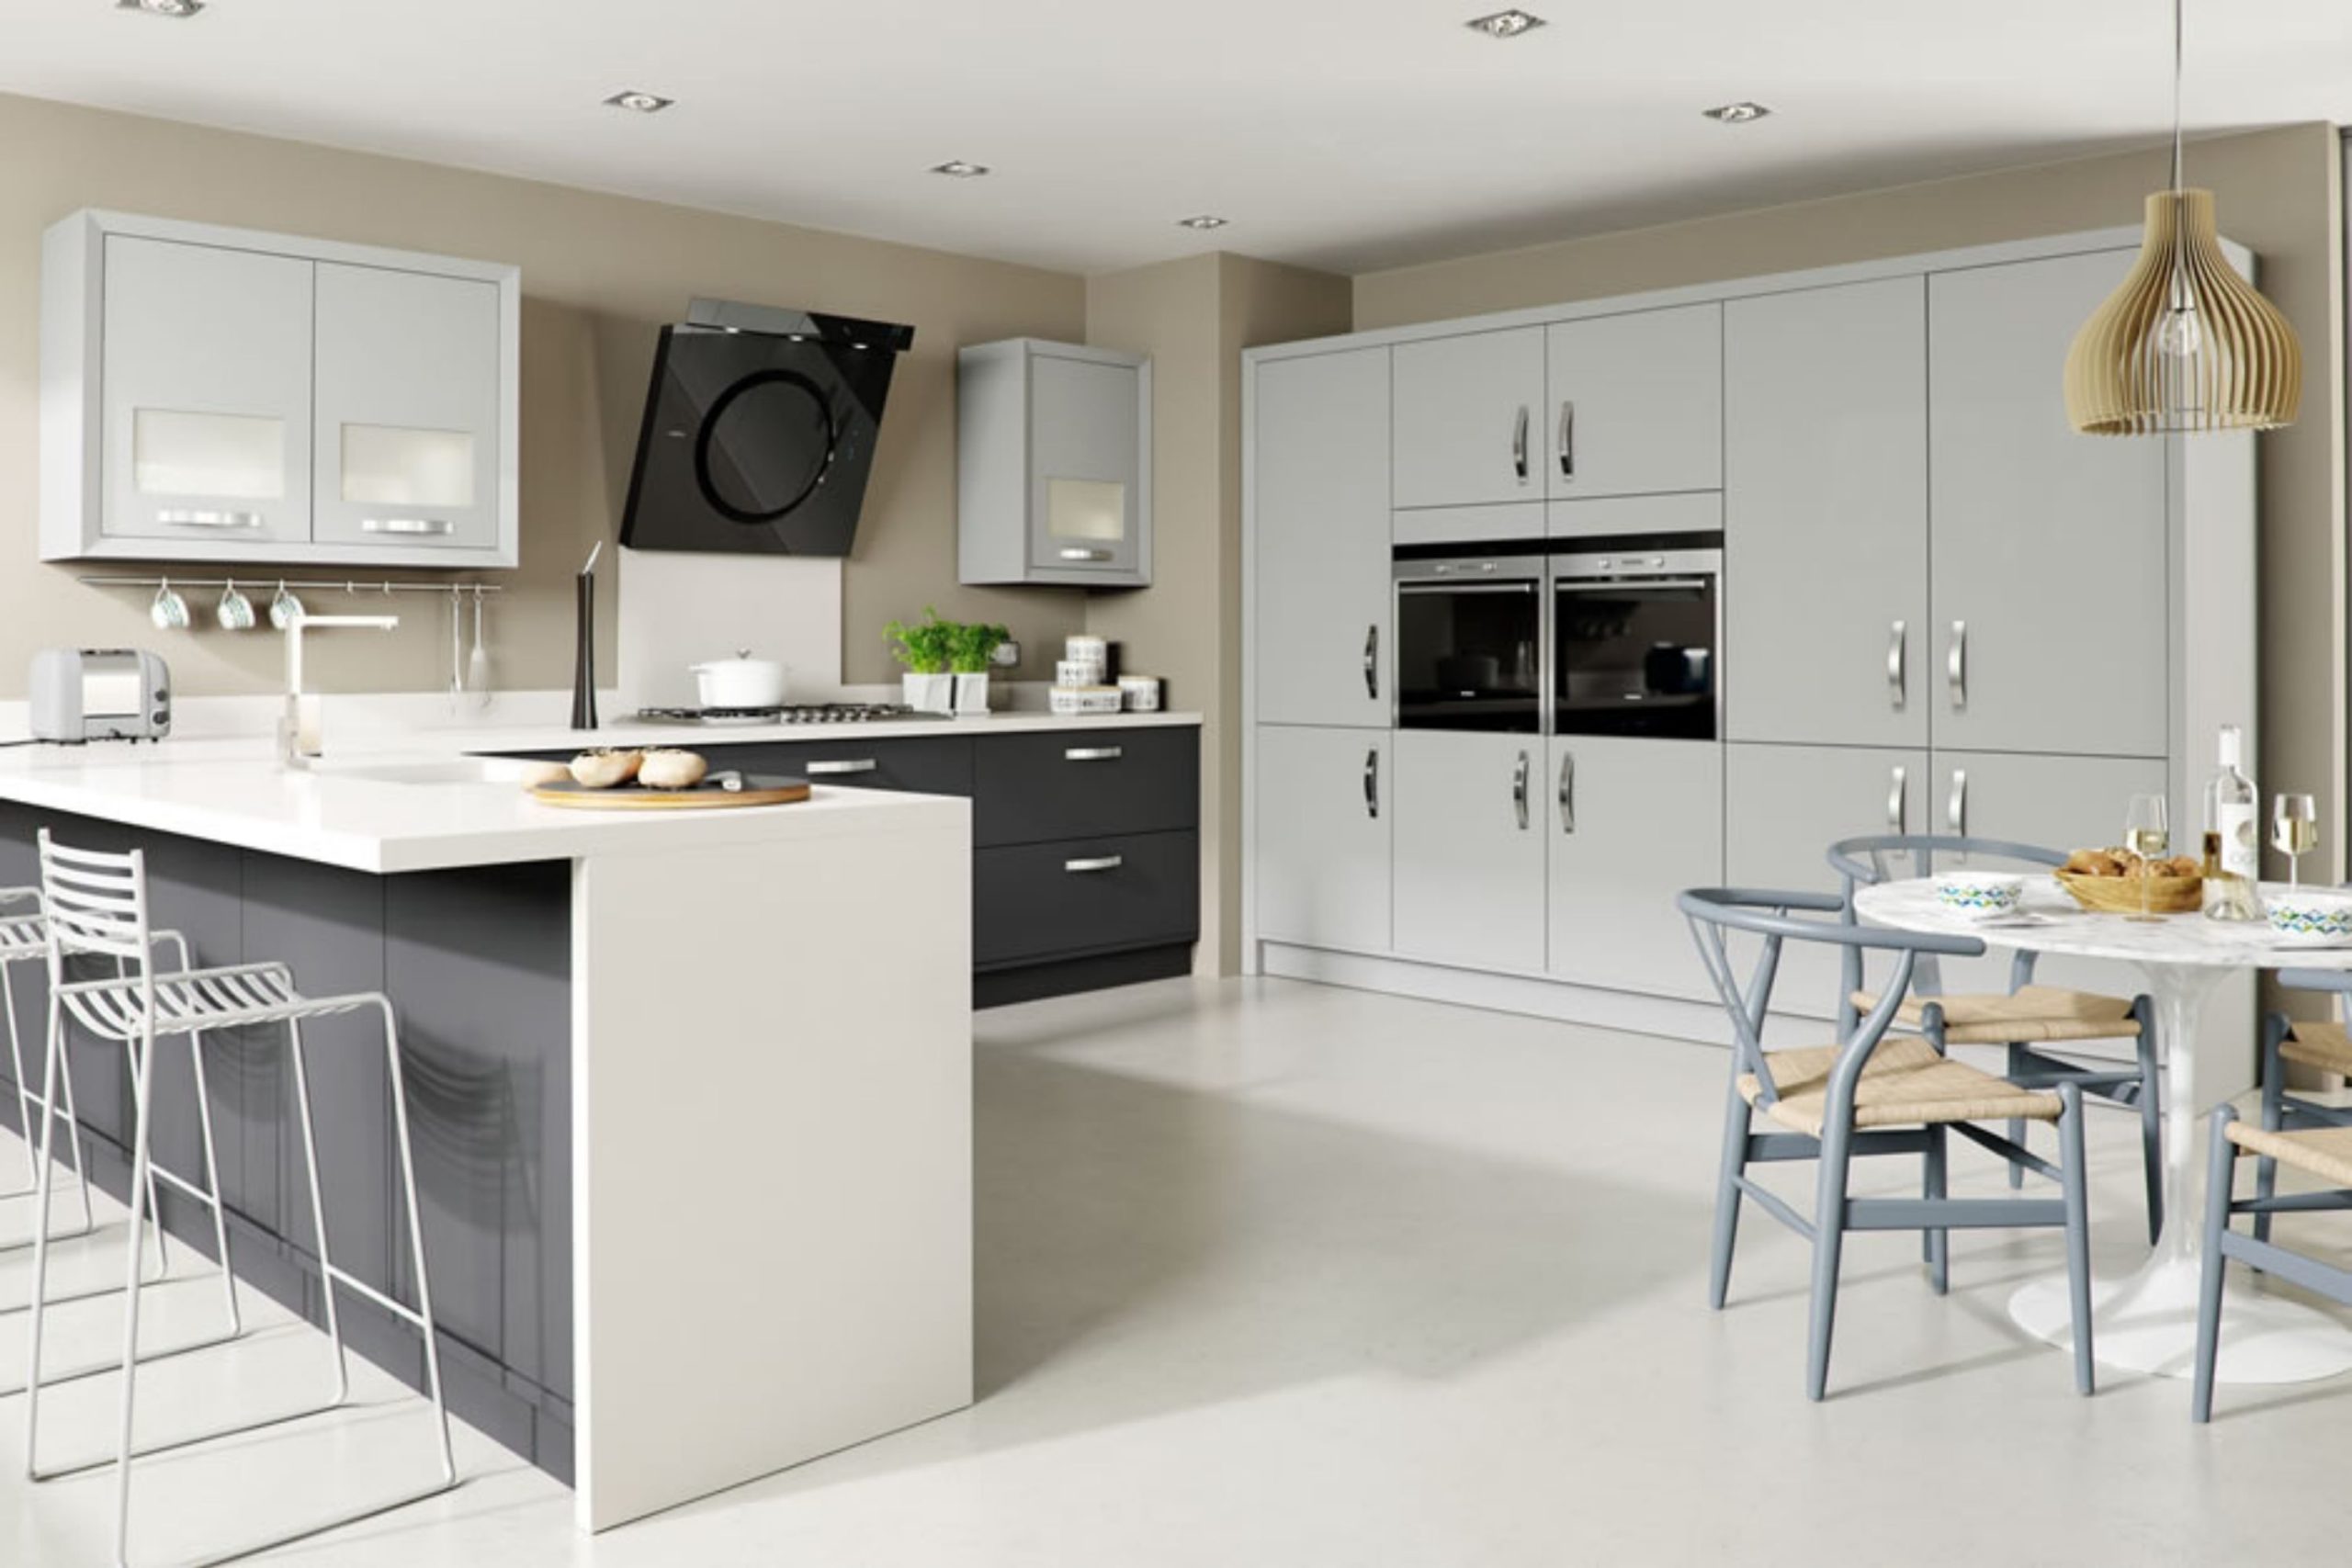 Luxury Kitchens In Hampshire | Kitchens InStyle